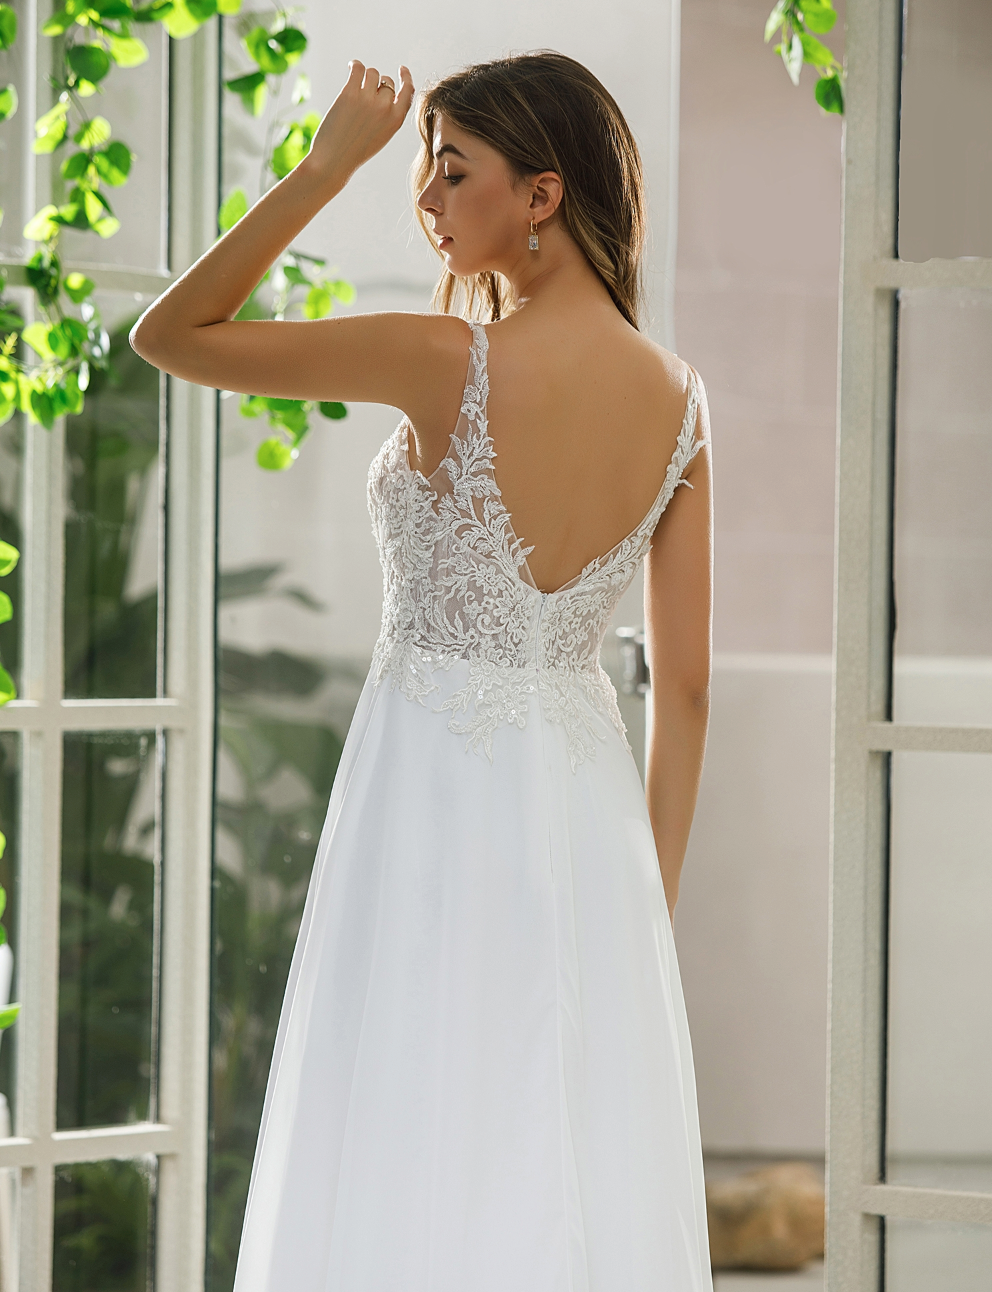 Simple Lace A-line Bridal Gown With Chiffon Skirt